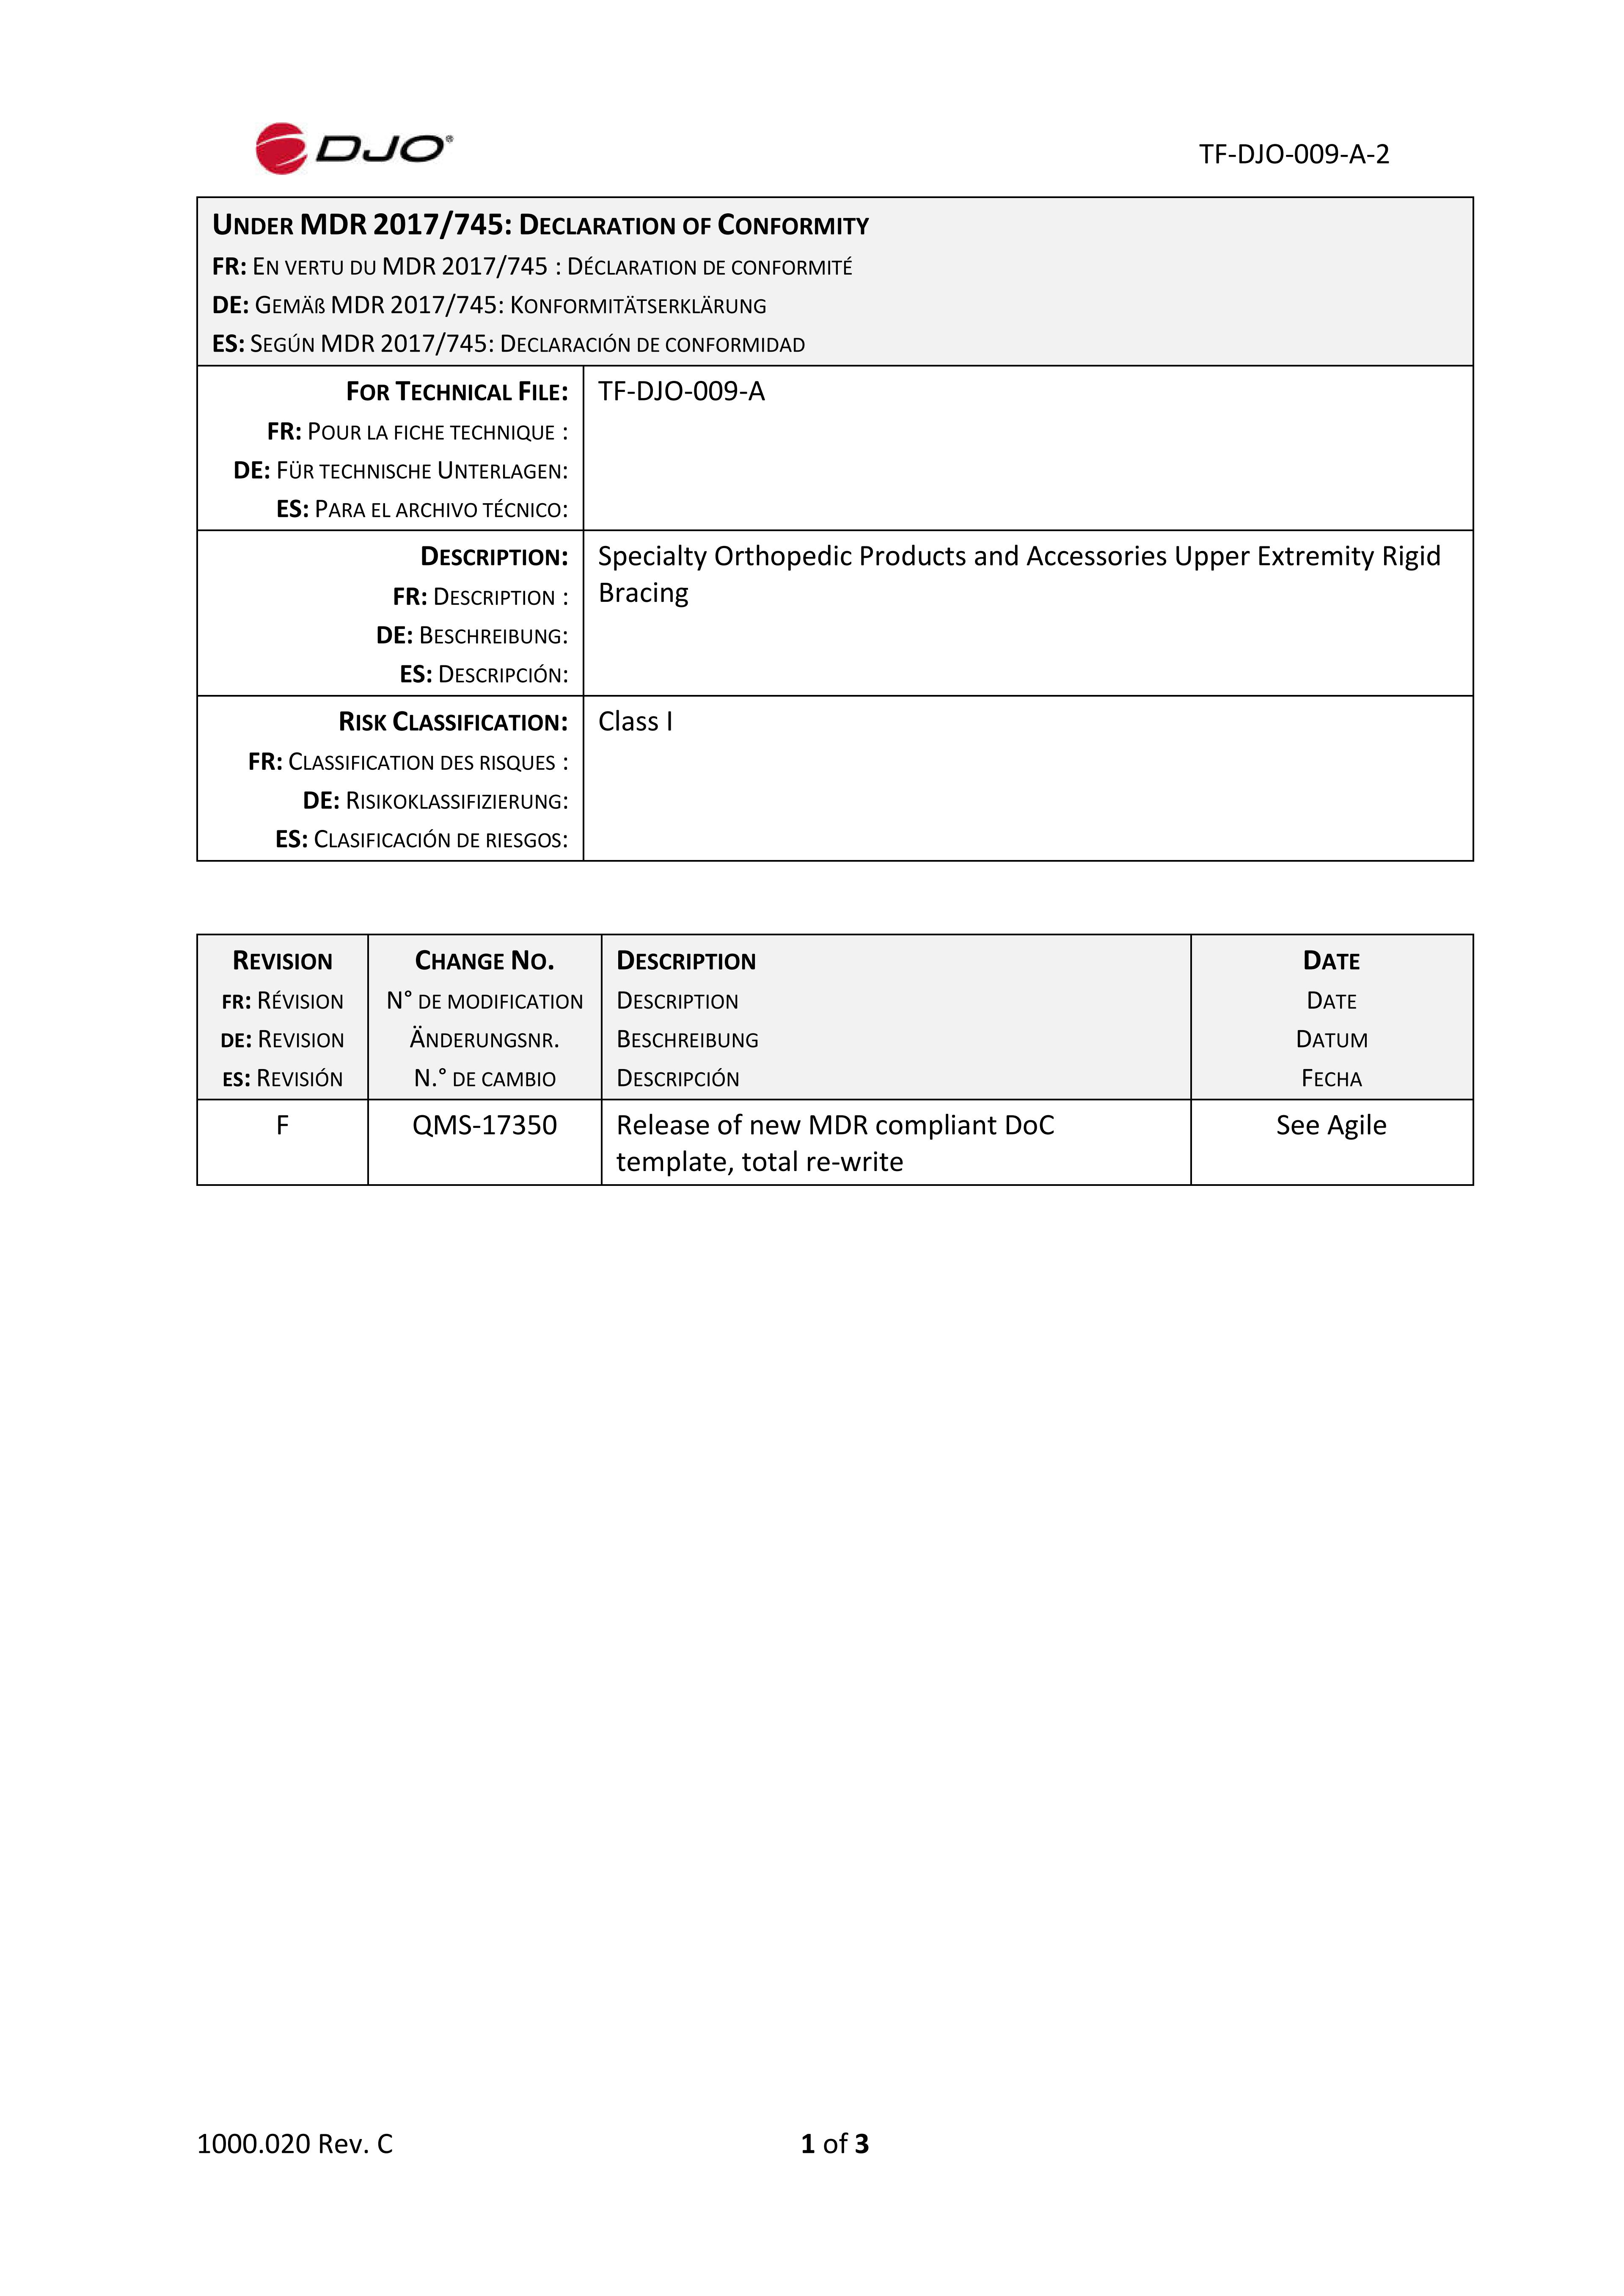 TF-DJO-009-A-2 _Specialty Orthopedic Products and Accessories DOC_Rev_F.pdf